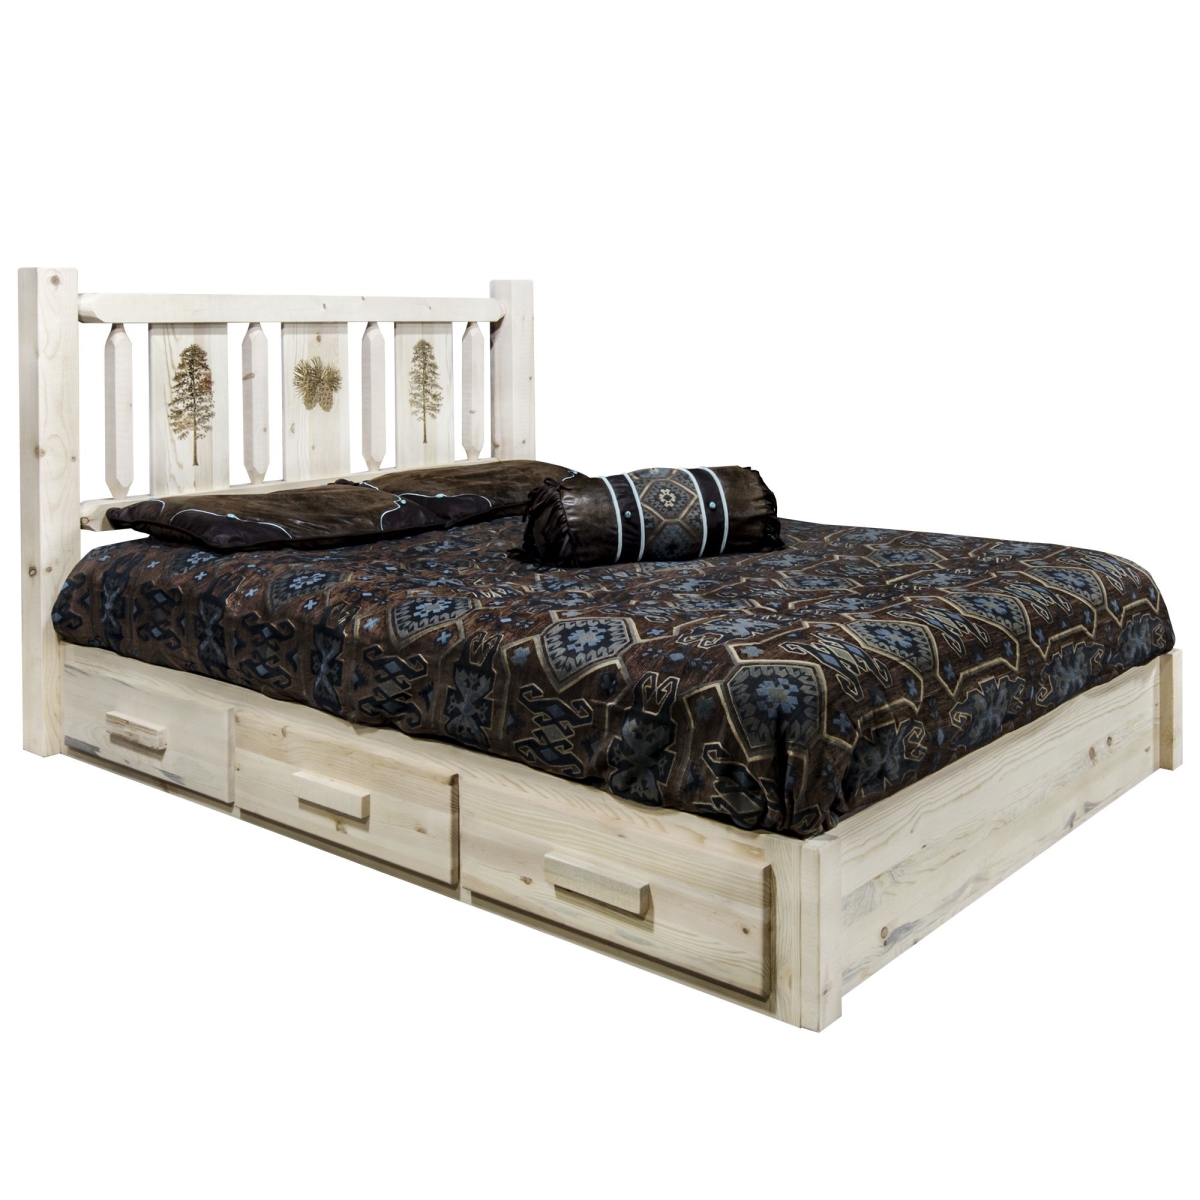 MWHCSBPTVLZPINE Homestead Collection Platform Bed with Storage, Twin Size with Laser Engraved Pine Design, Clear Lacquer Finish -  Montana Woodworks